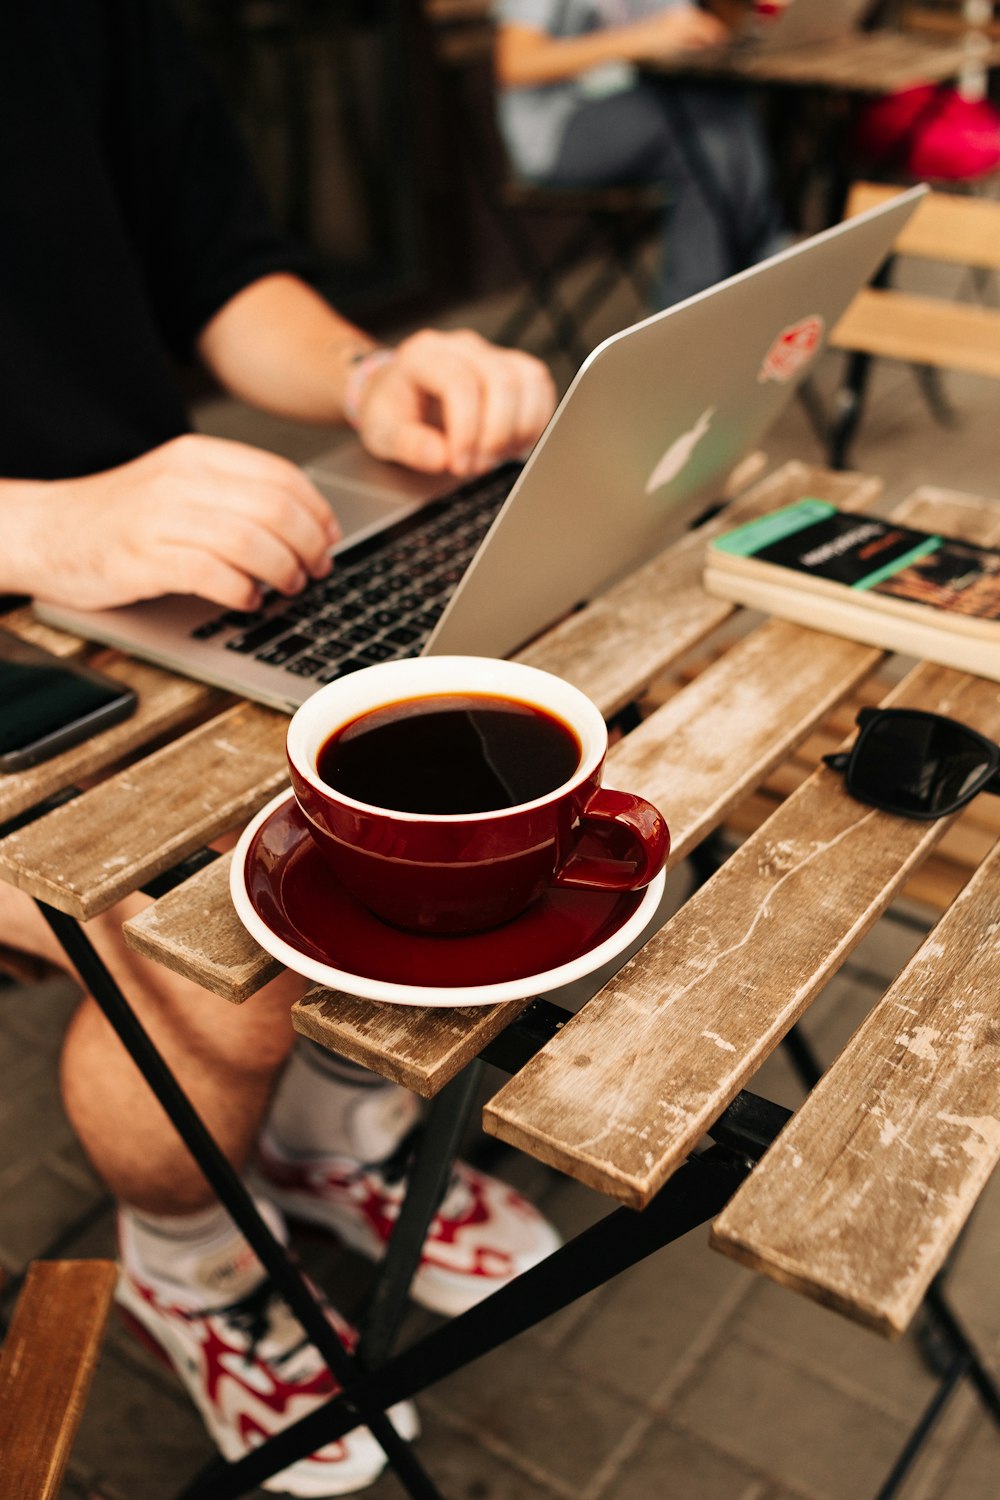 a person sitting at a table with a laptop and a cup of coffee